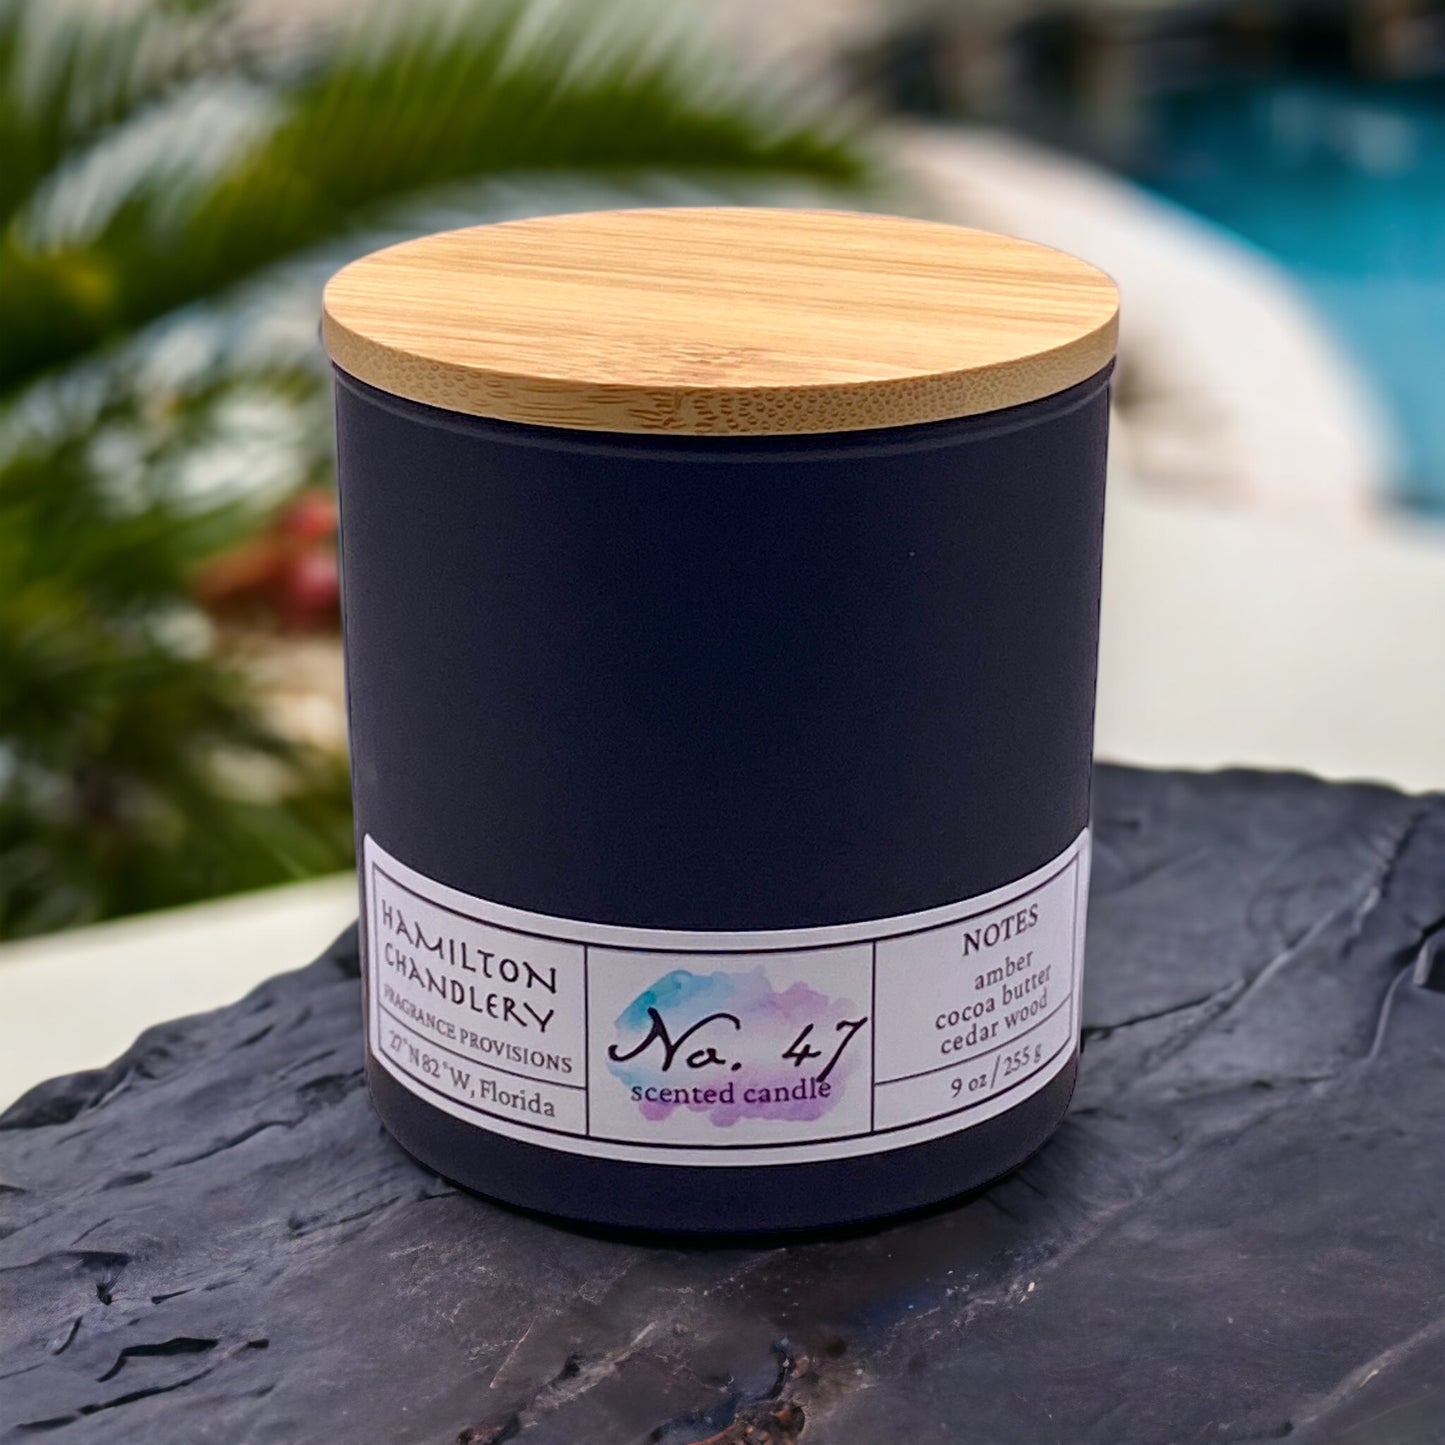 Fragrance No. 47 Blown Glass Candle on Slate with Palm Trees and Resort Pool in Background | Hamilton Chandlery